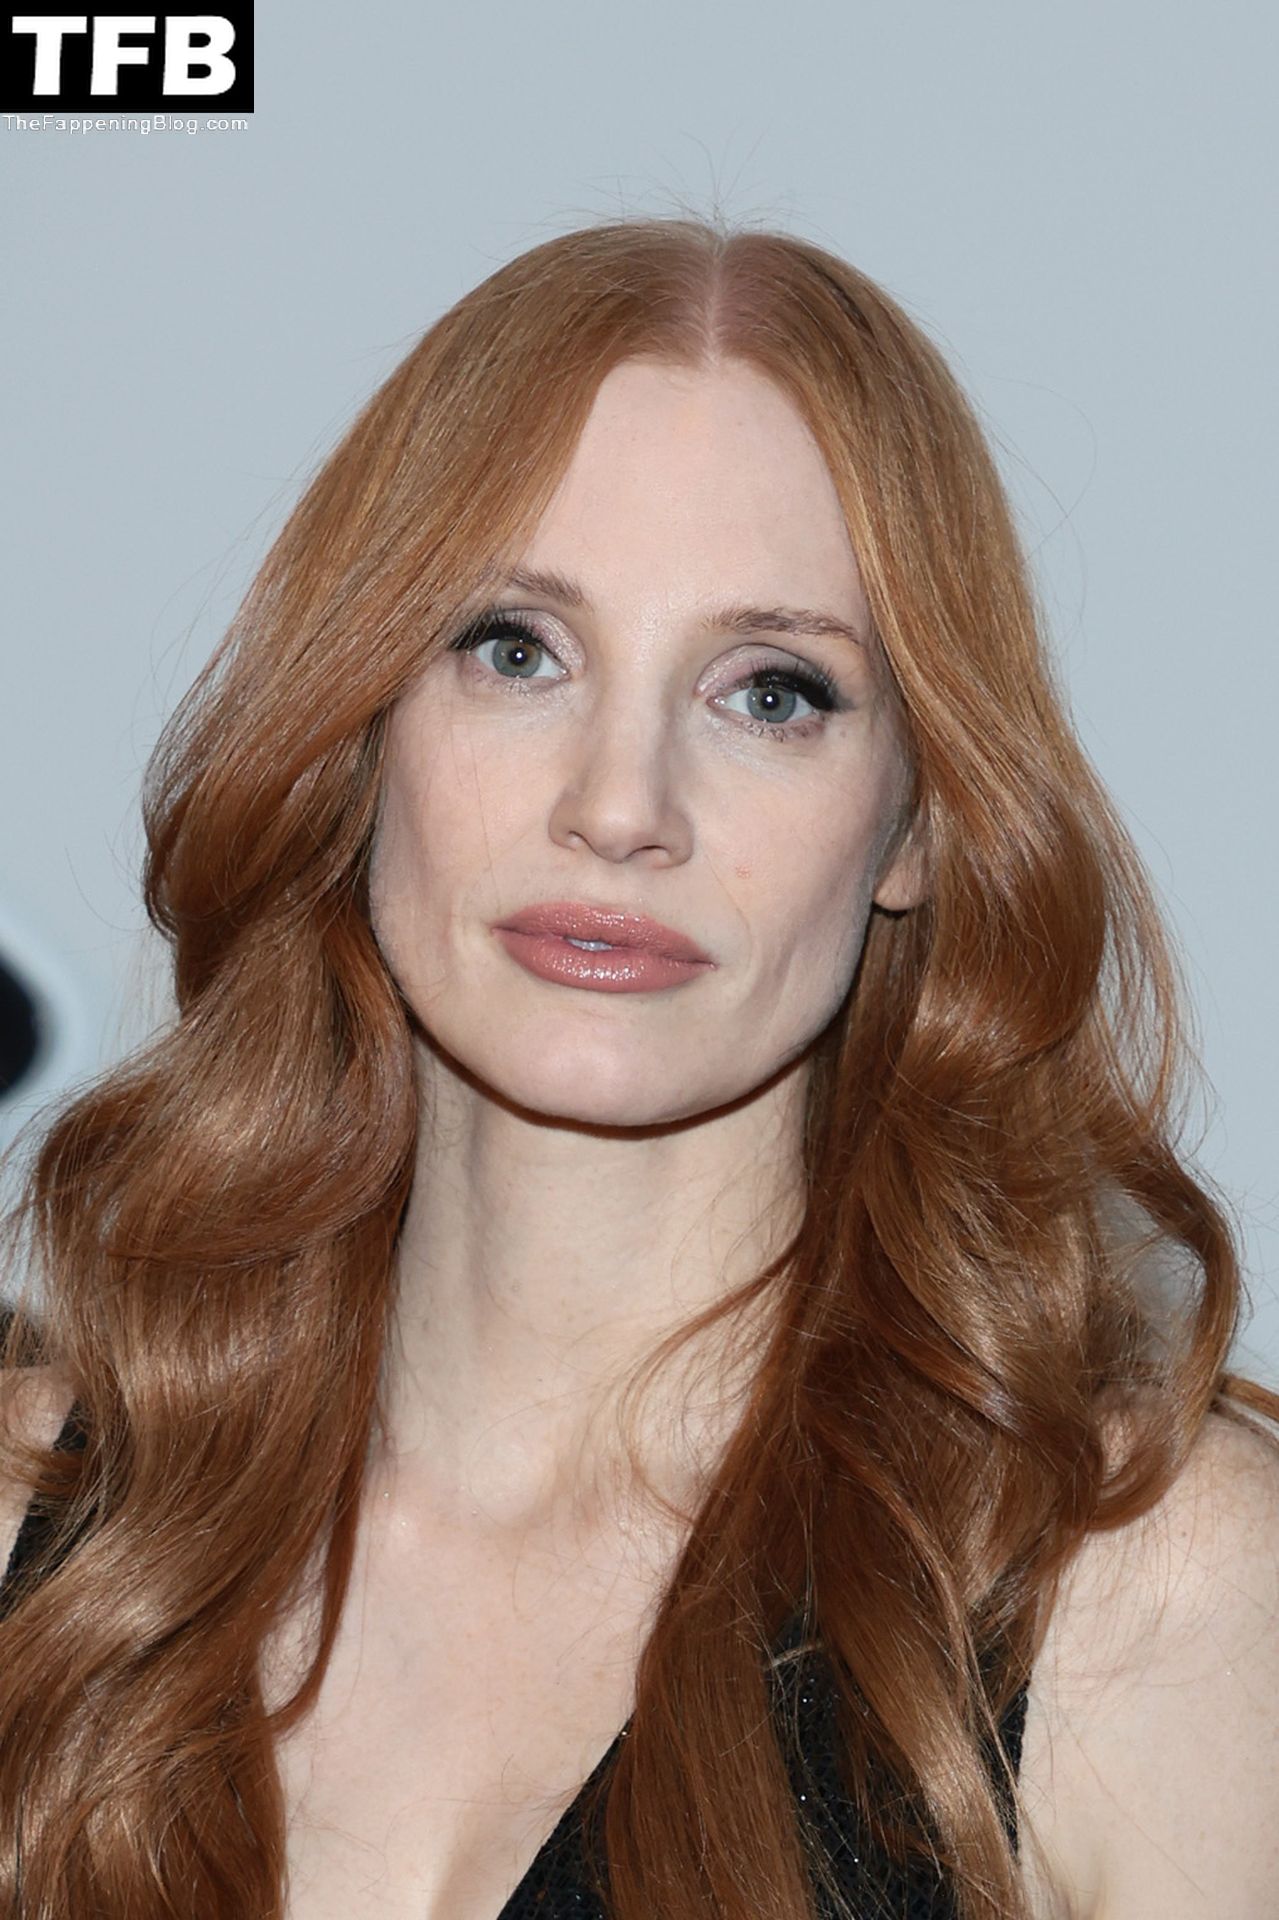 Jessica-Chastain-Sexy-The-Fappening-Blog-12.jpg